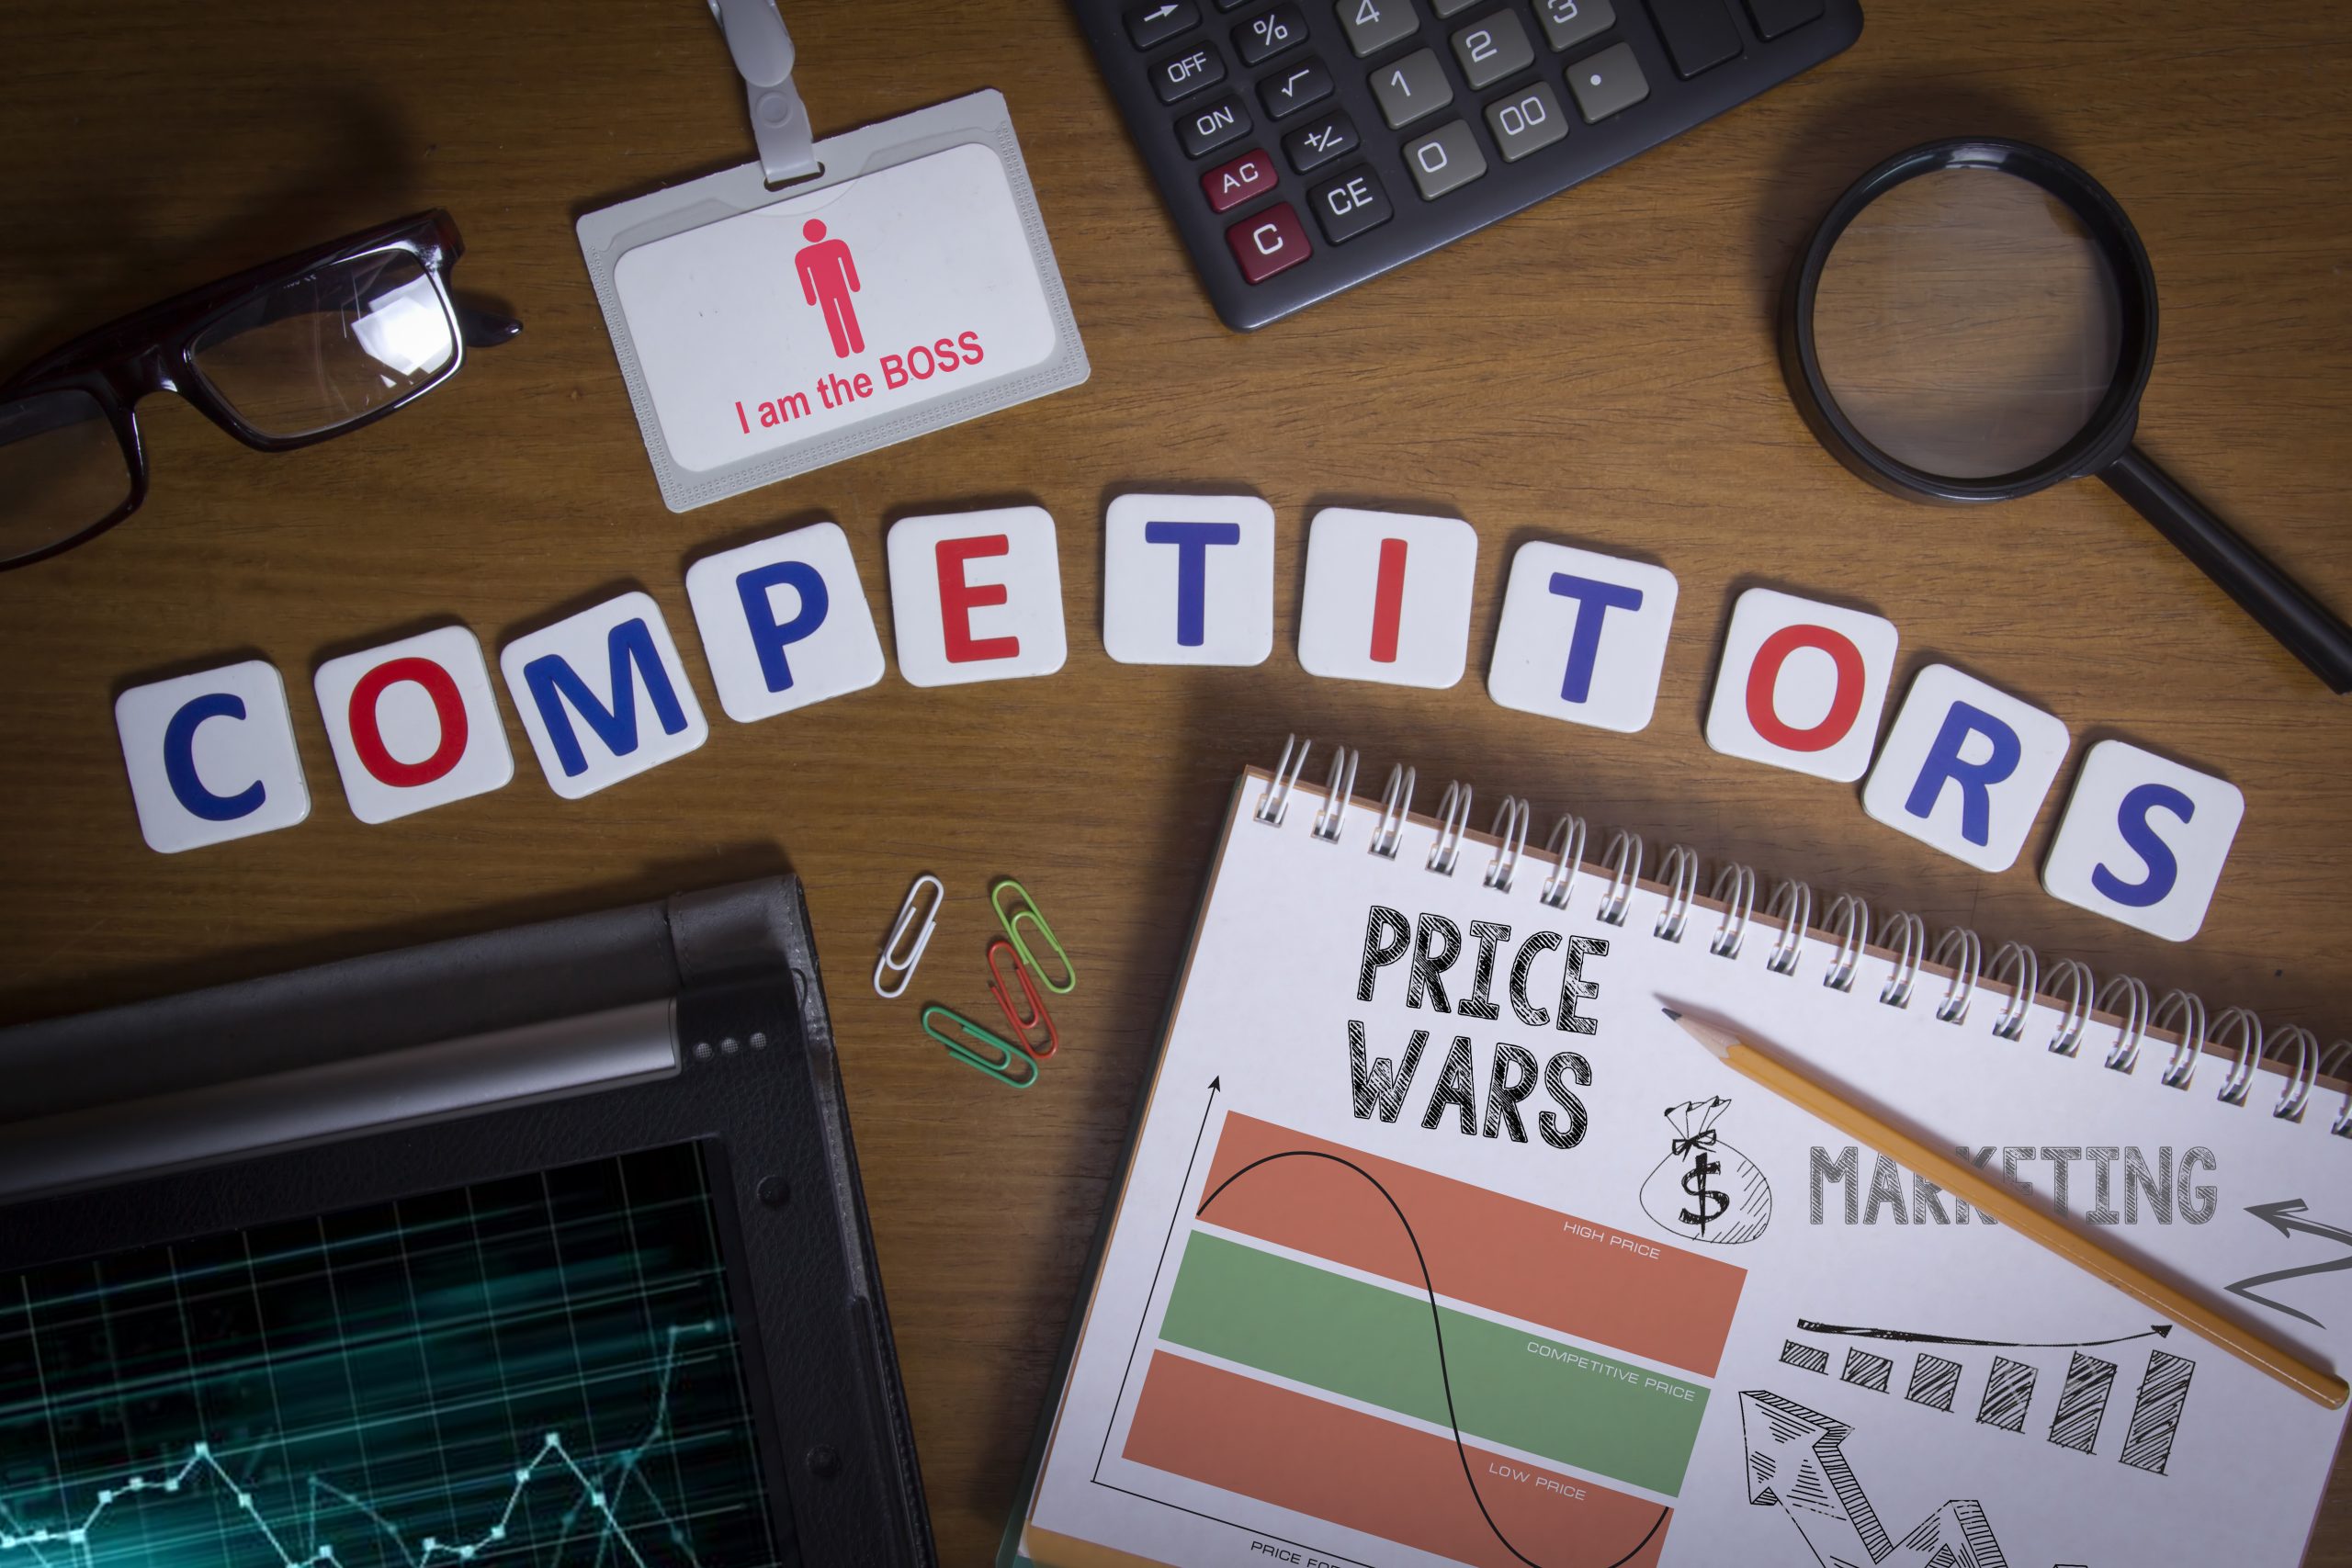 Track your competitors' prices and determine the best price